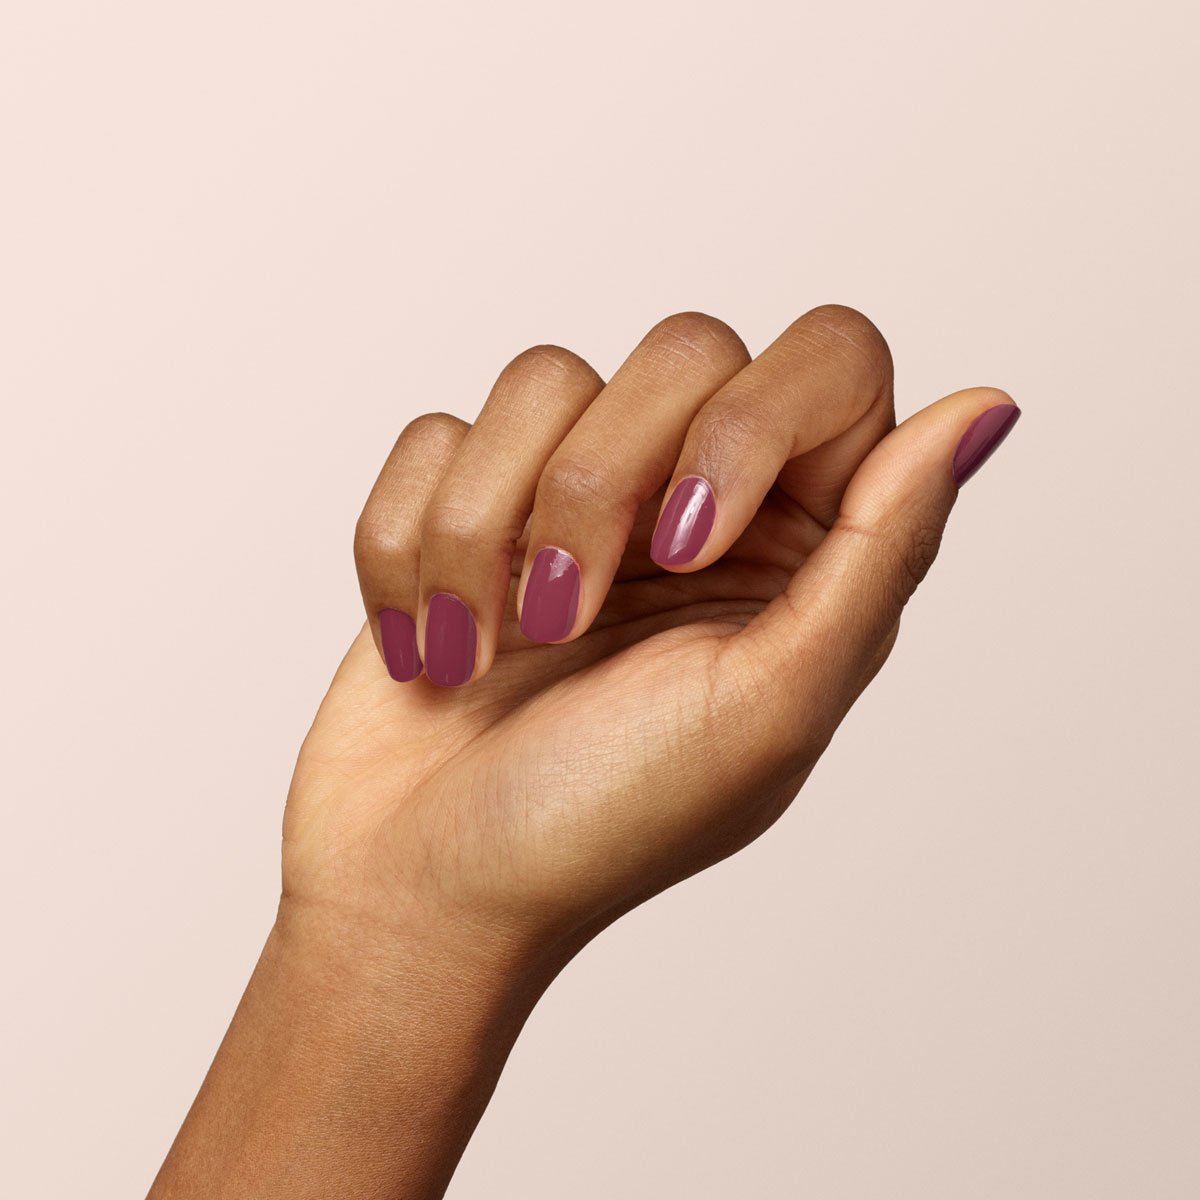 Buy Plum Color Affair Nail Polish | 7-Free Formula | High Shine & Plump  Finish | 100% Vegan & Cruelty Free Nailpaint | On The Mauve - 127 | 11 ml  Online at Low Prices in India - Amazon.in